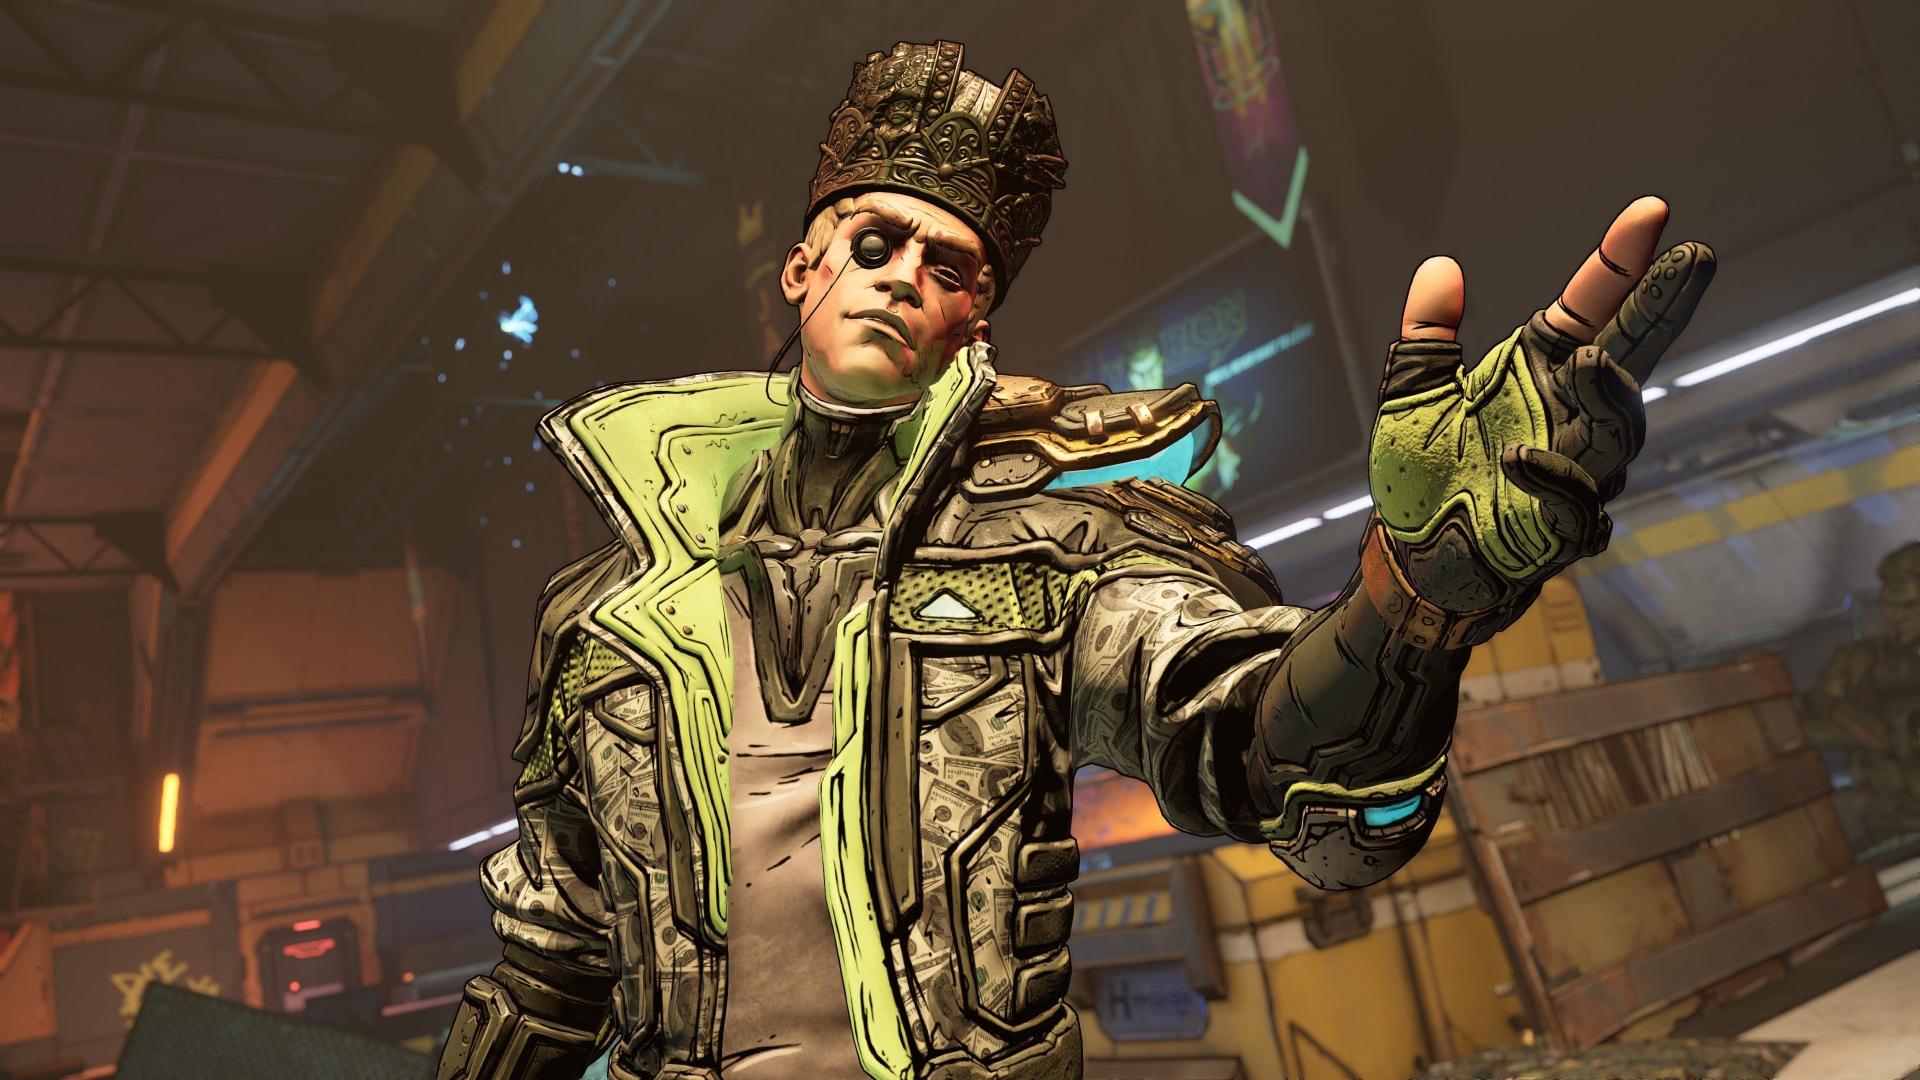 TAKE-TWO acquires GEARBOX, plans NEW BORDERLANDS